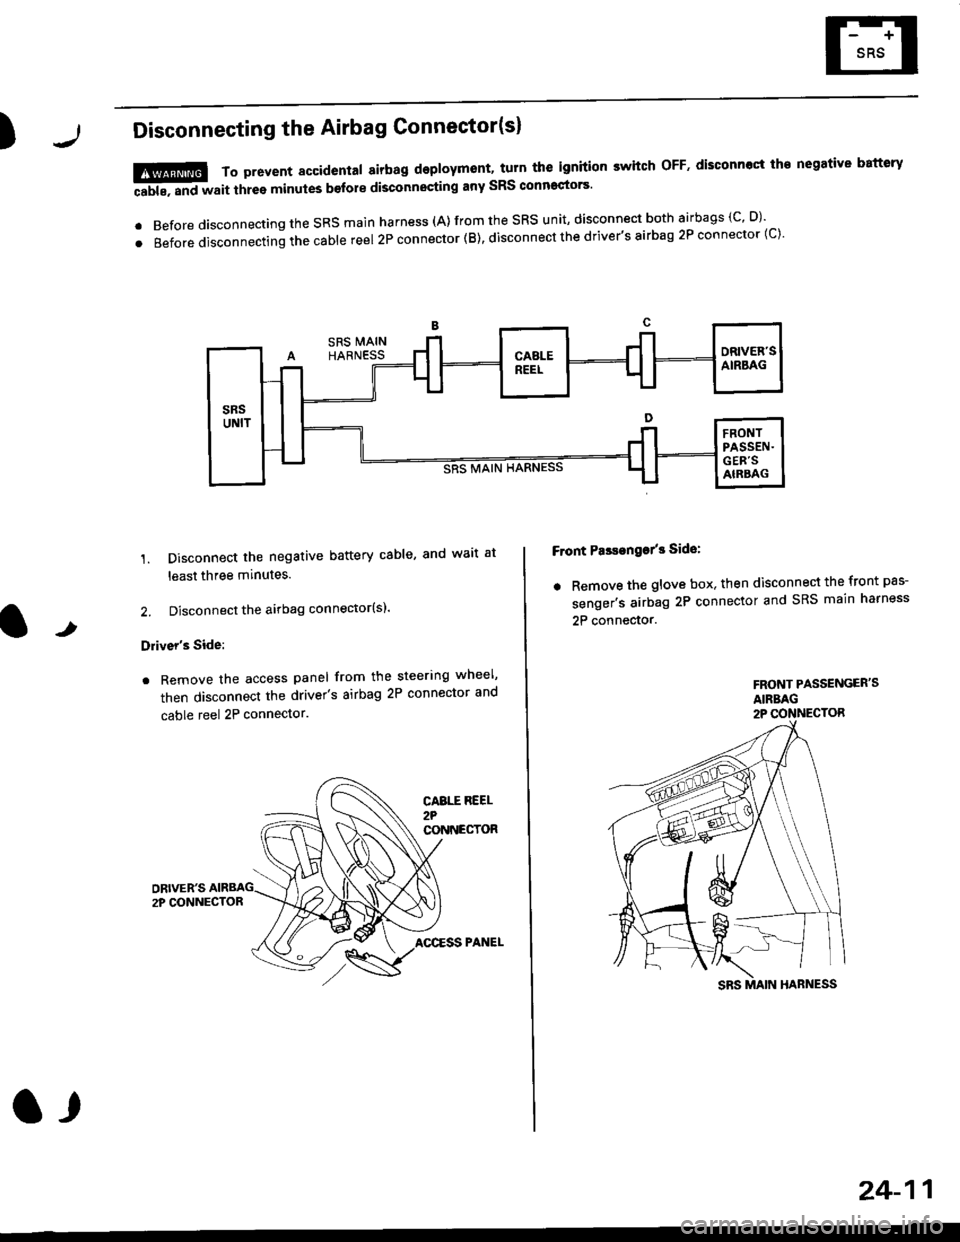 HONDA CIVIC 1996 6.G Repair Manual )Disconnecting the Airbag Connector(sl
1. Disconnect the negative battery cable, and wait at
least three minutes.
2. Disconnect the airbag connector(sl.
Drivers Side:
. Remove the access panel from 